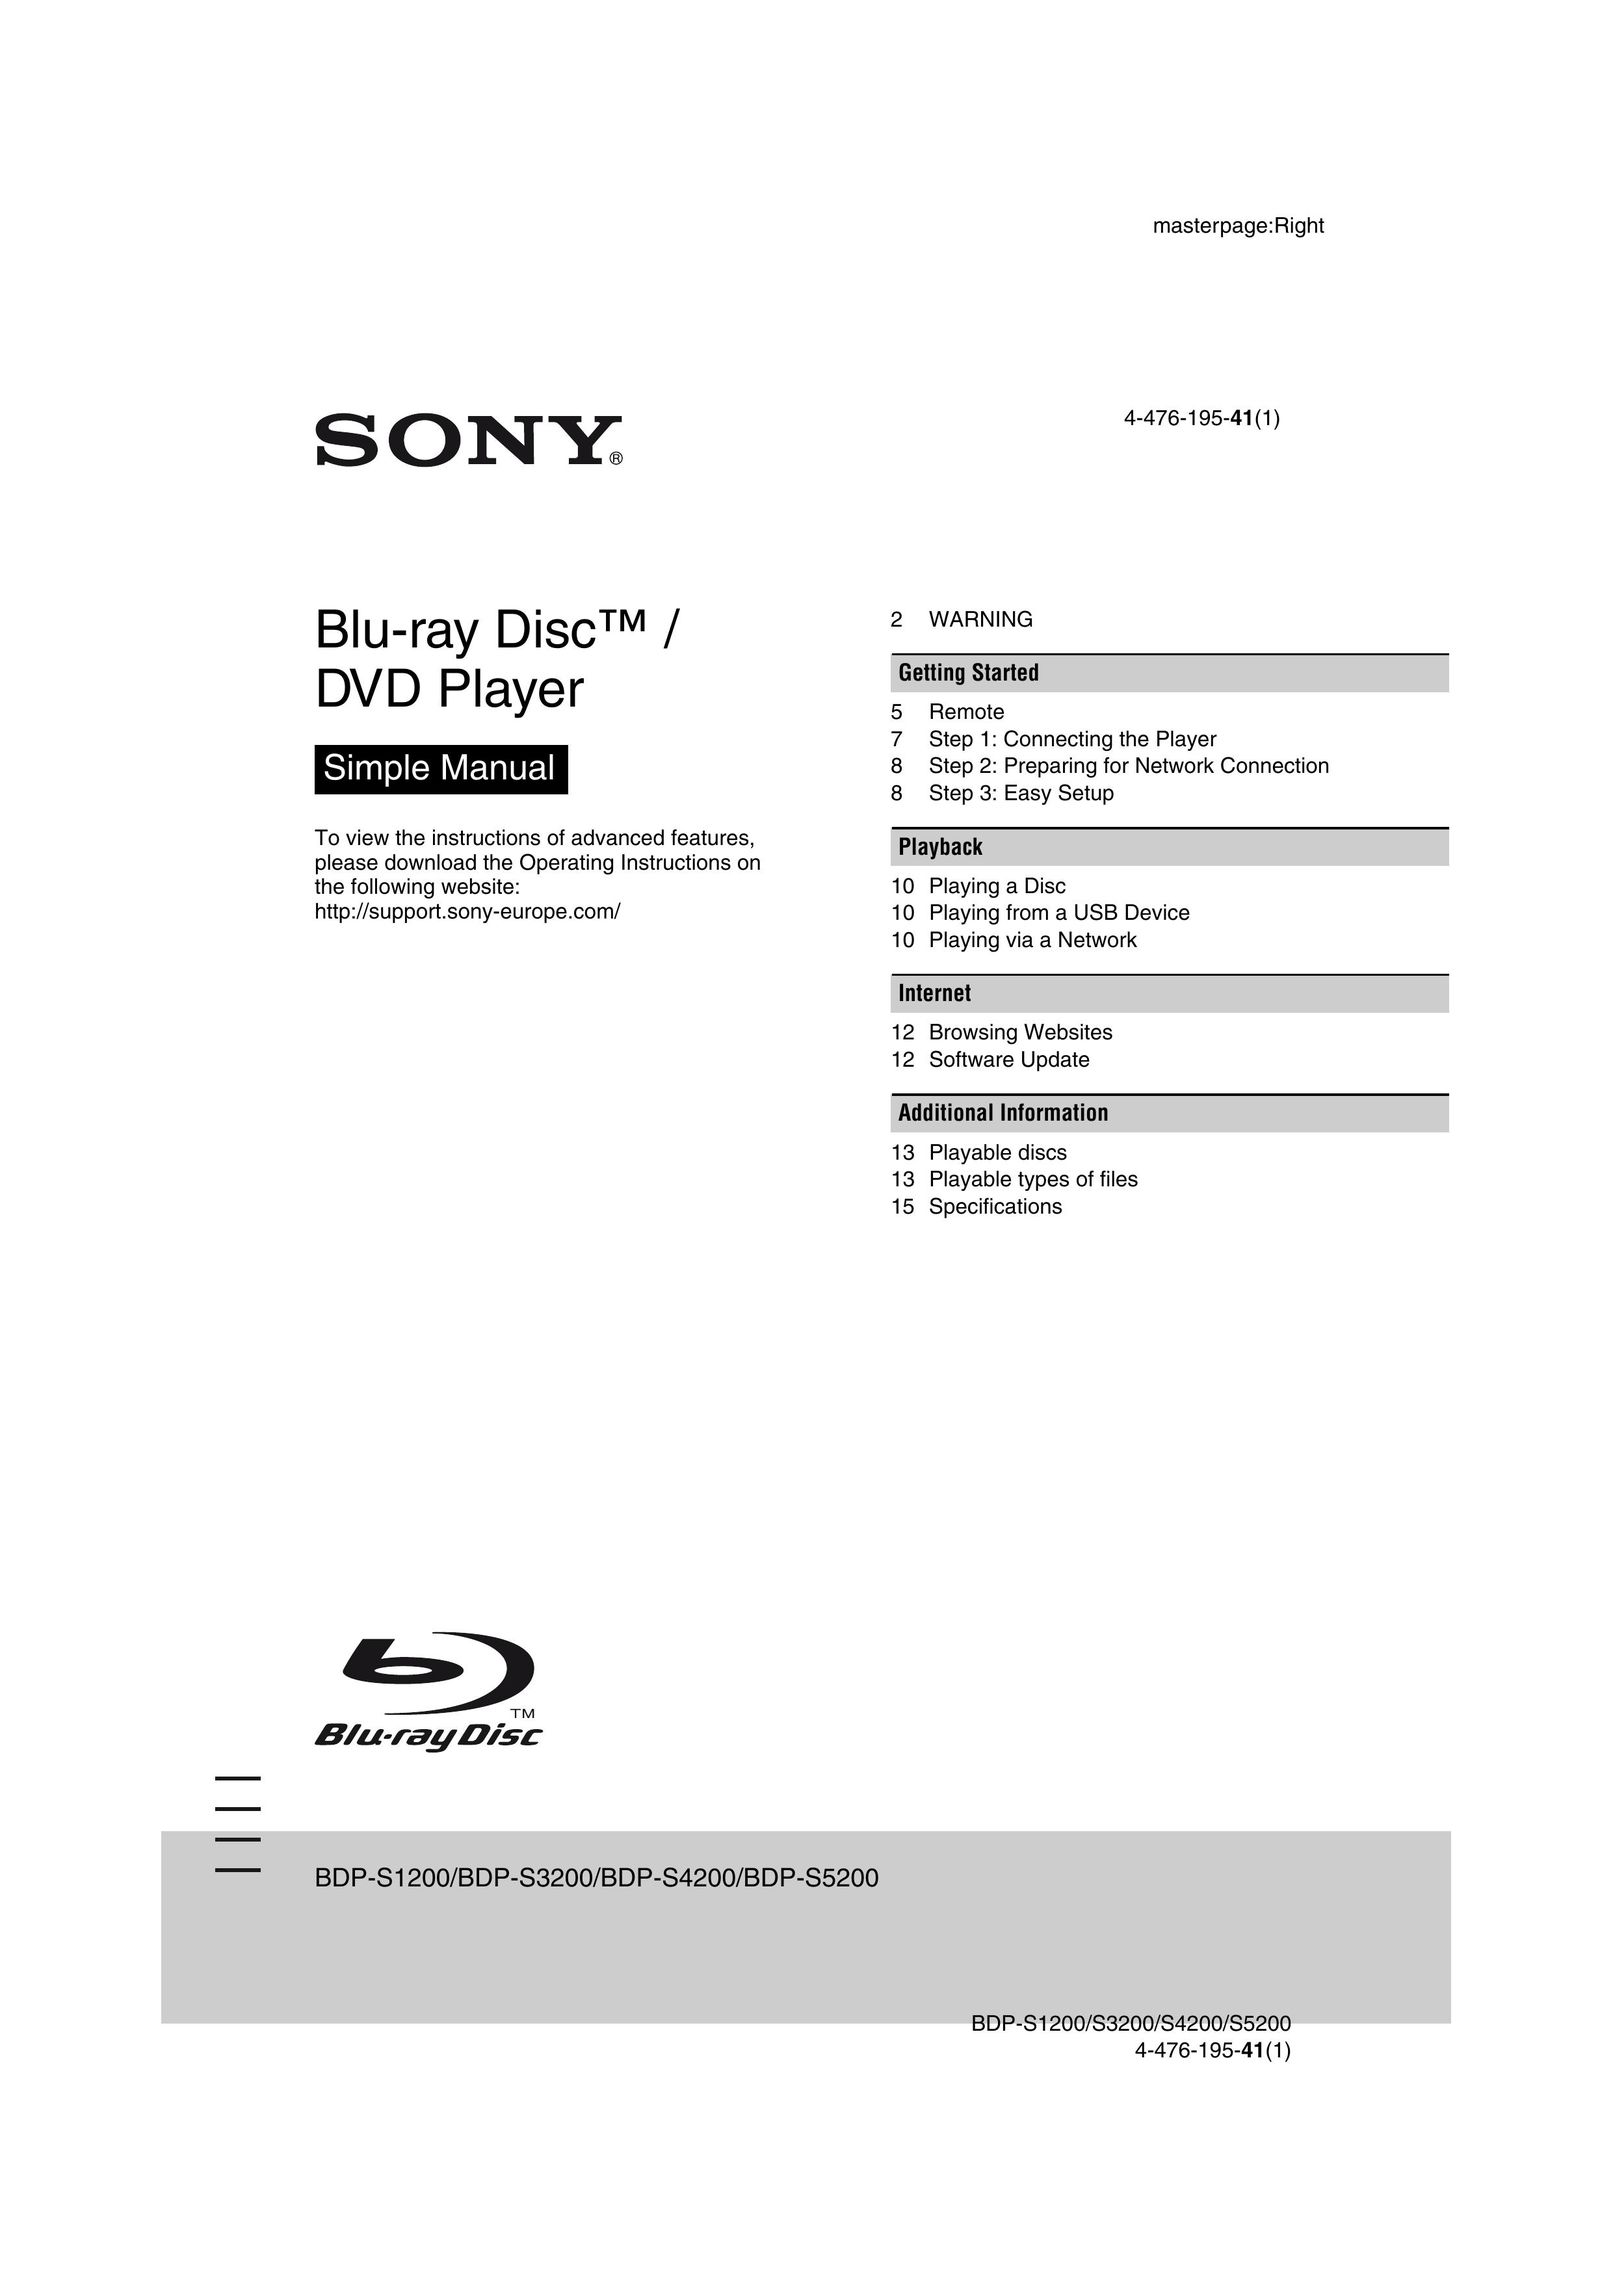 Sony BDP-S4200 Blu-ray Player User Manual